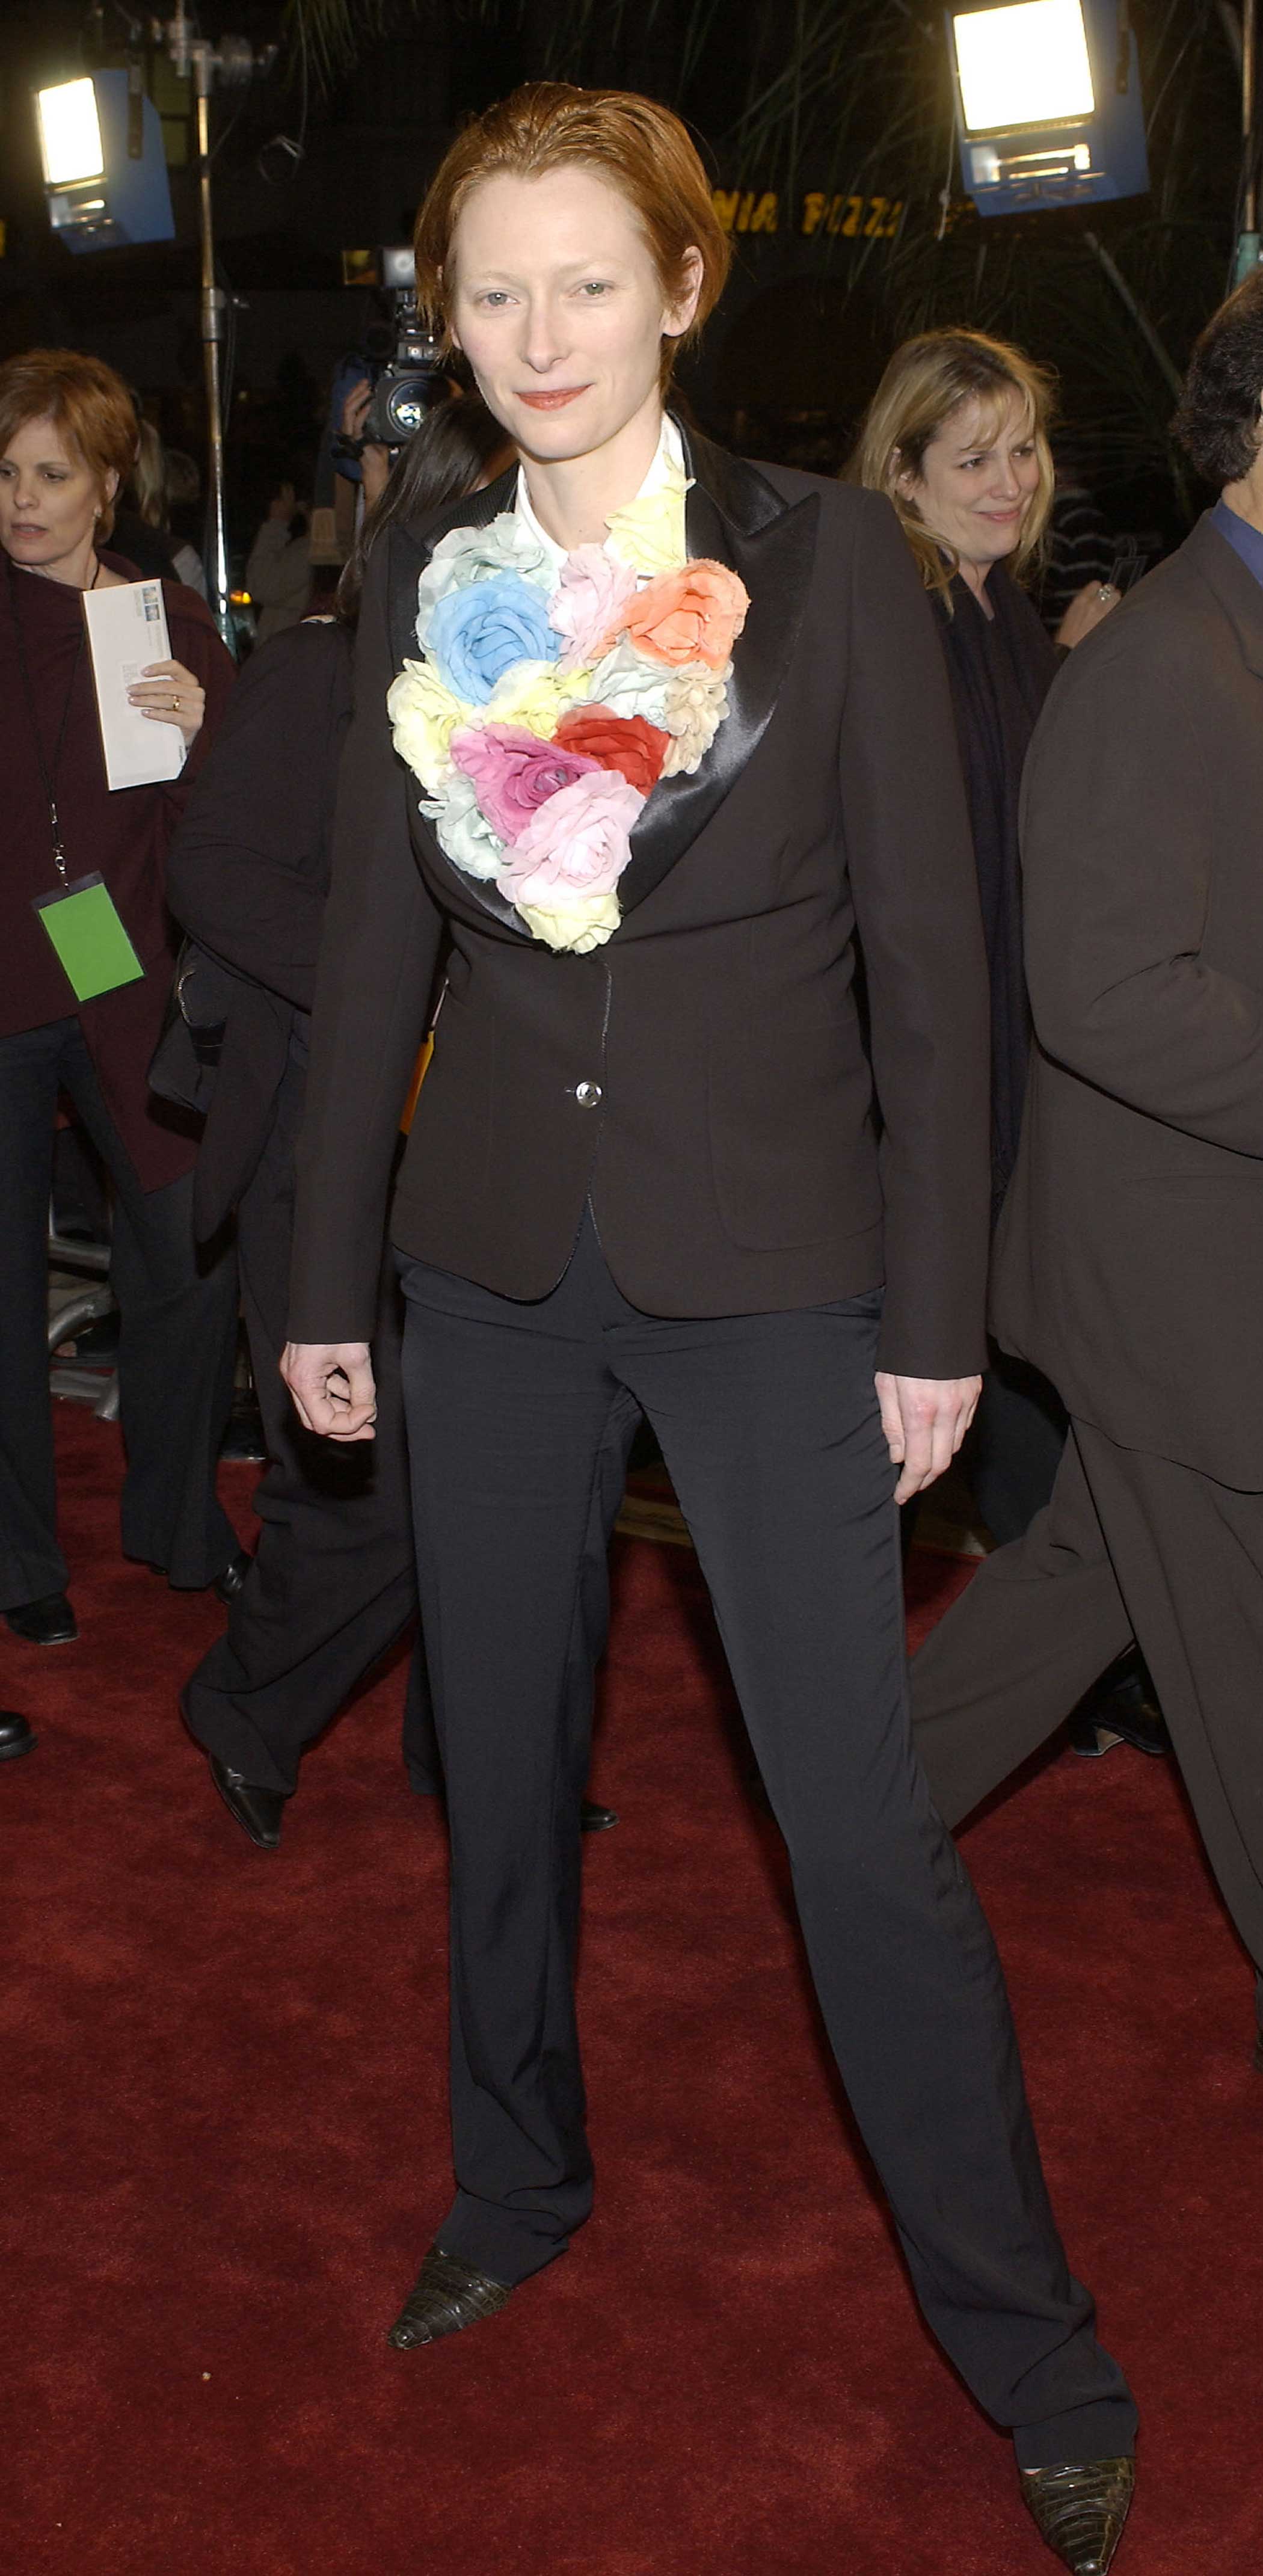 Tilda Swinton attends the premiere of Adaptation on Dec. 3, 2002 in Westwood, Calif.